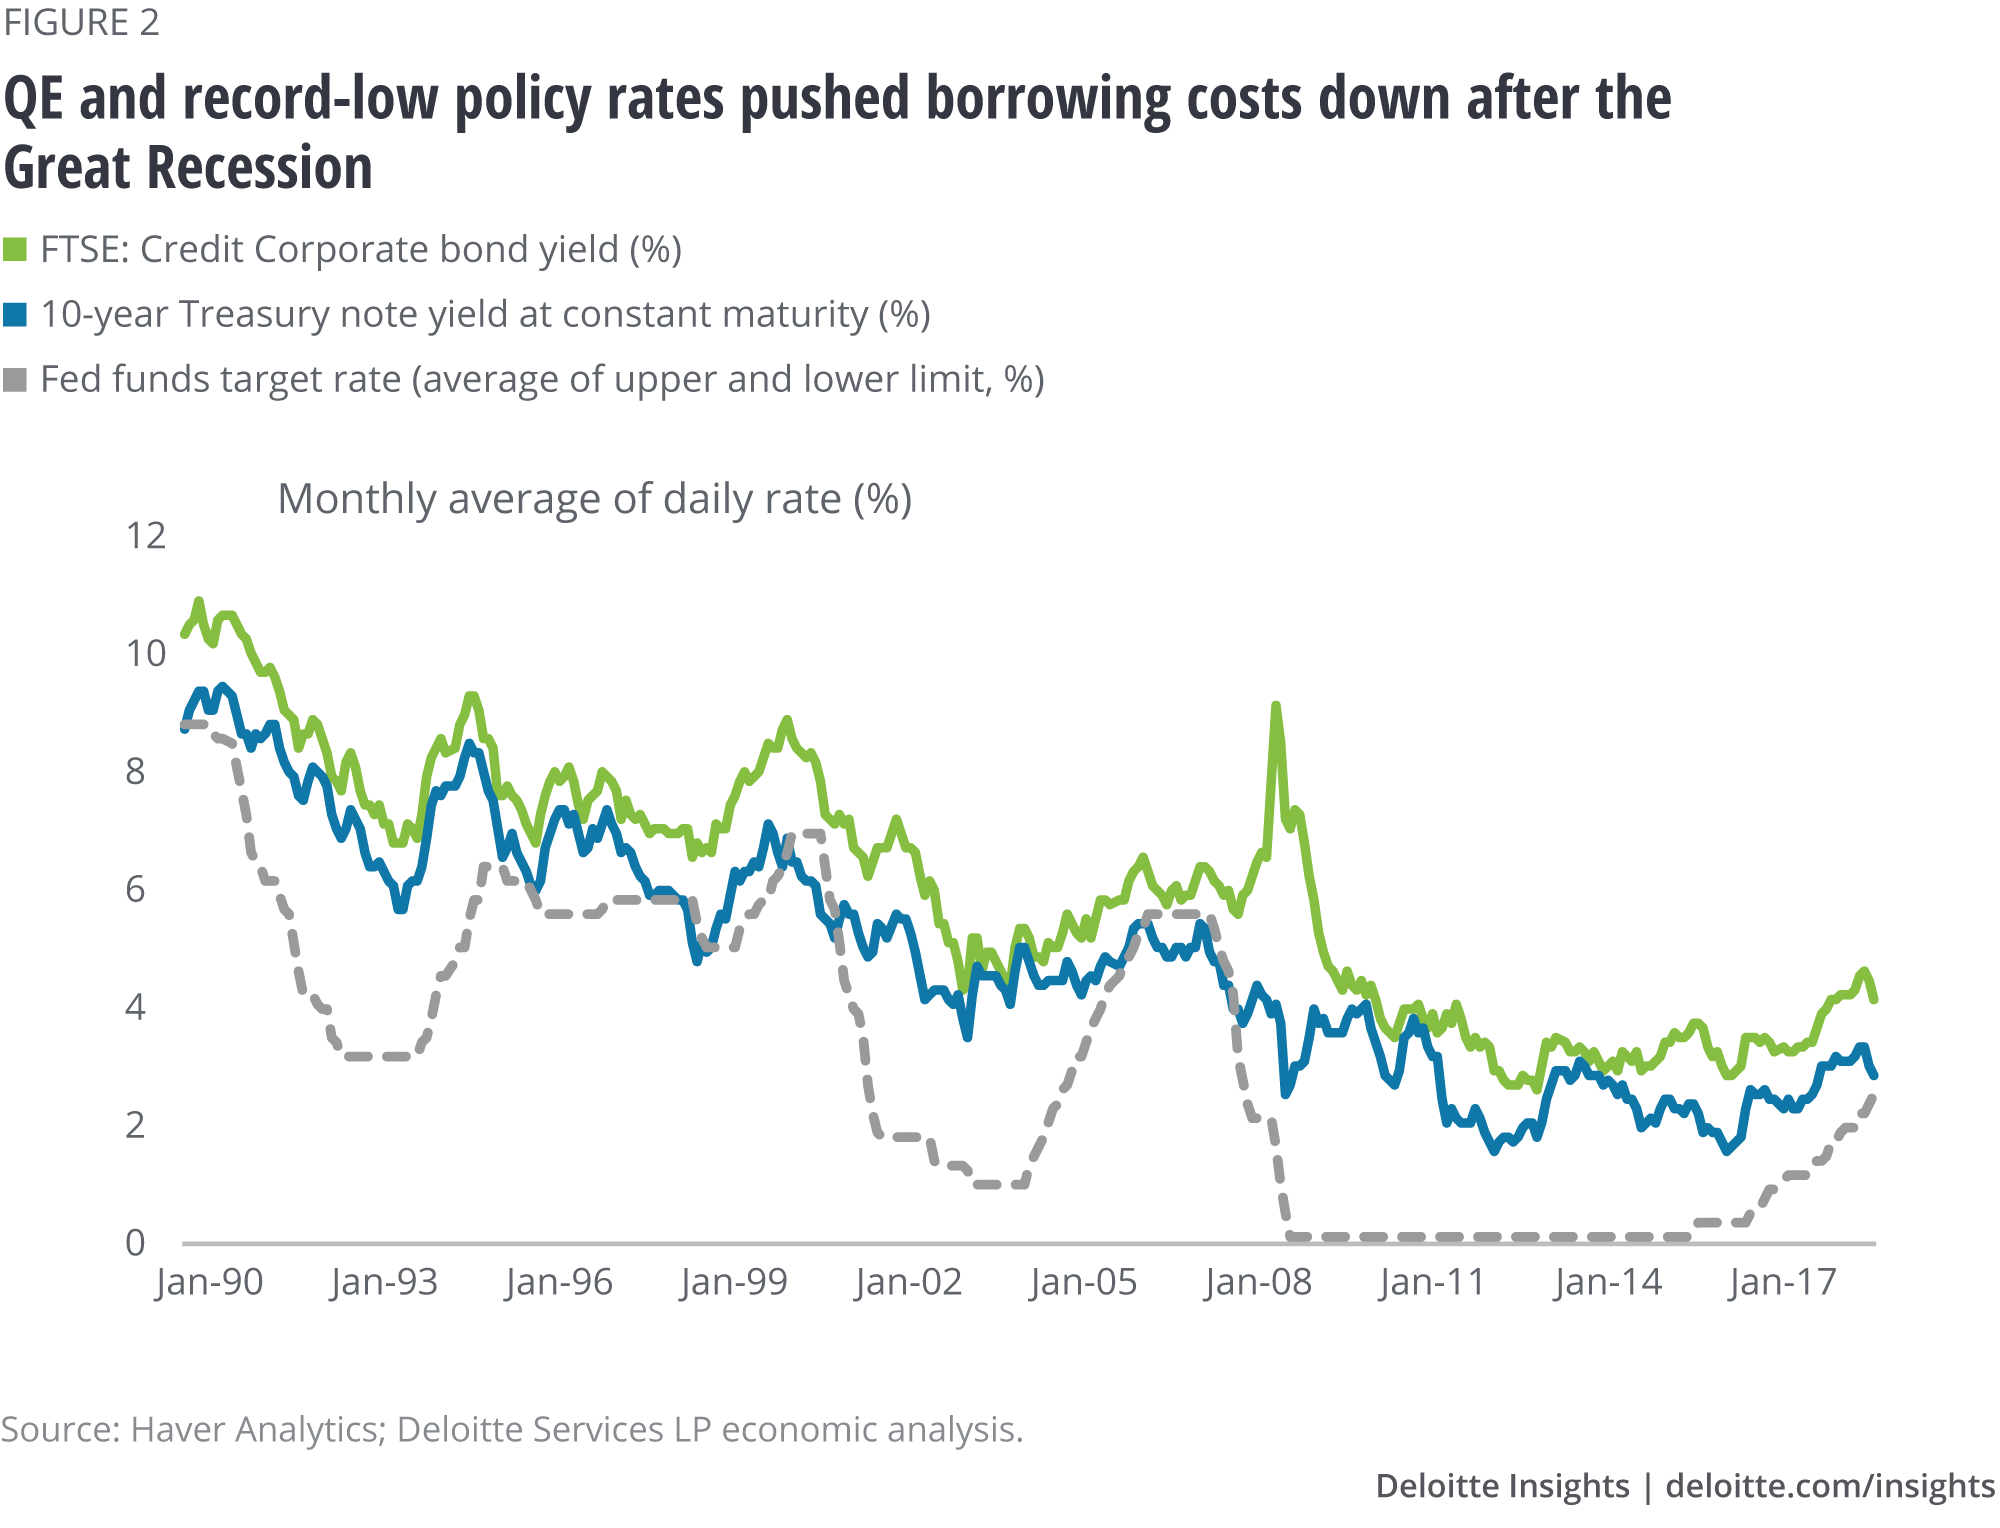 QE and record-low policy rates pushed borrowing costs down after the Great Recession